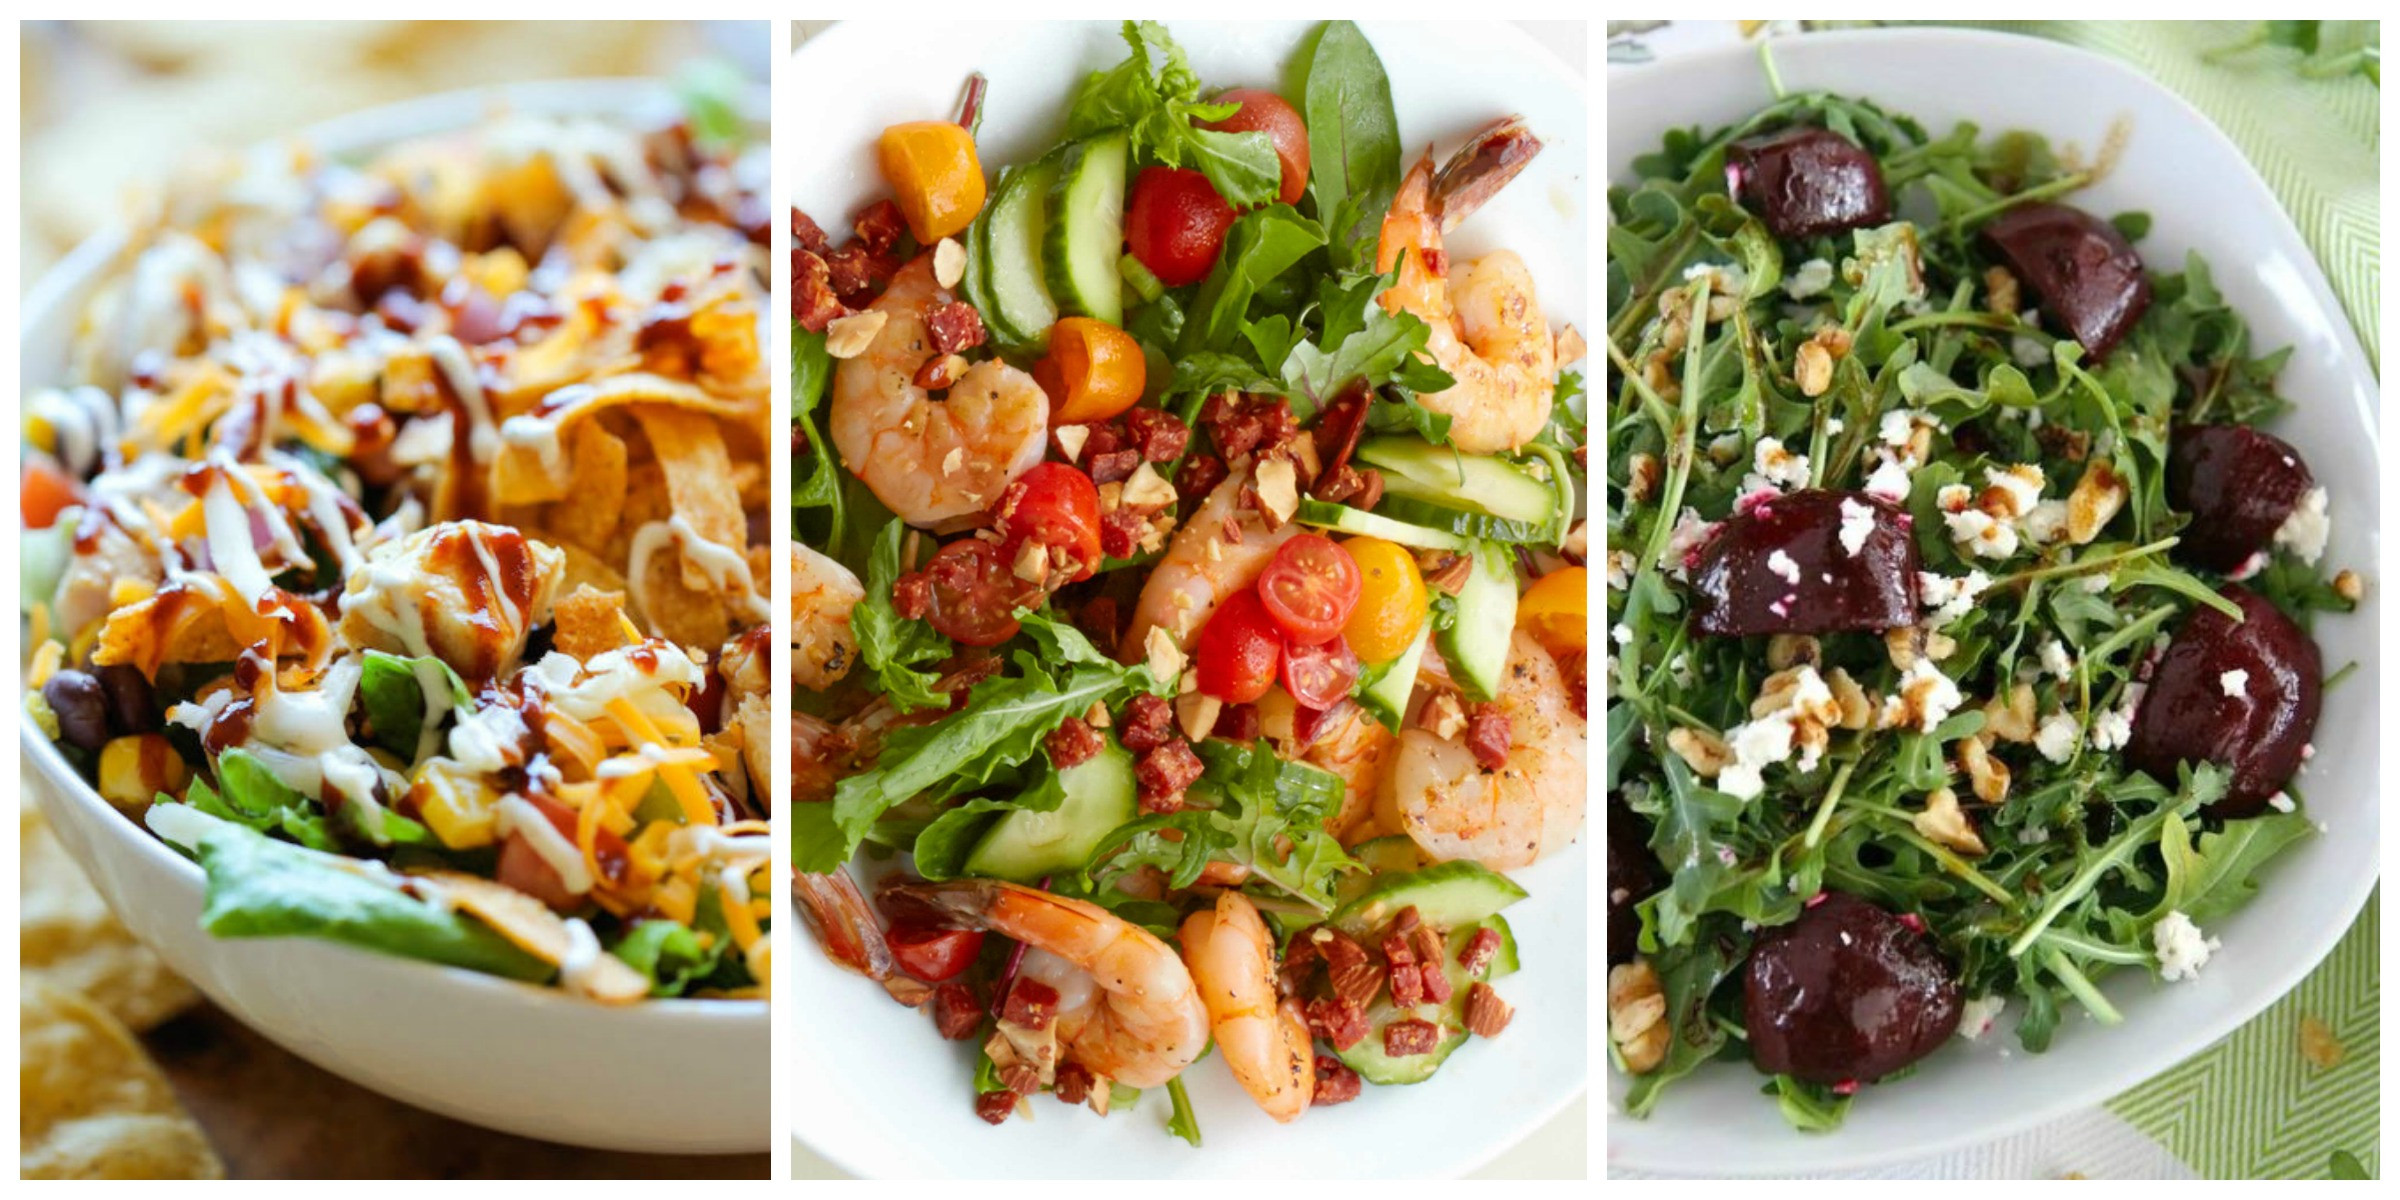 Easy Salads For Dinner
 22 Best Salads for Dinner Easy Recipes for Hearty Salads